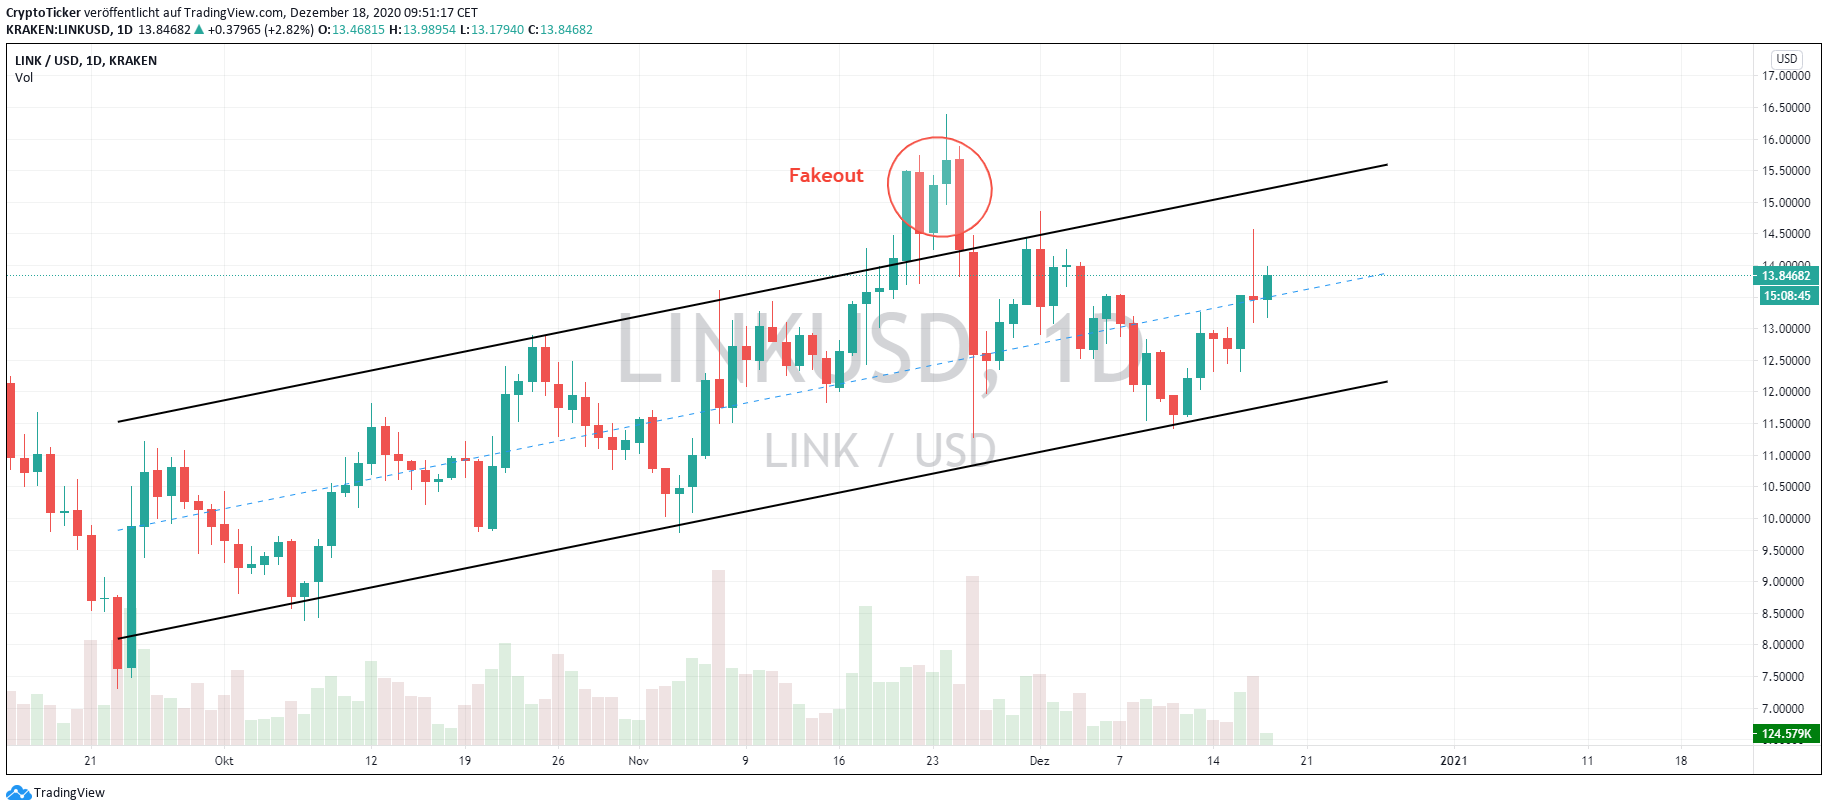 LINK/USD 1-Day chart – steady uptrend with a previous fakeout